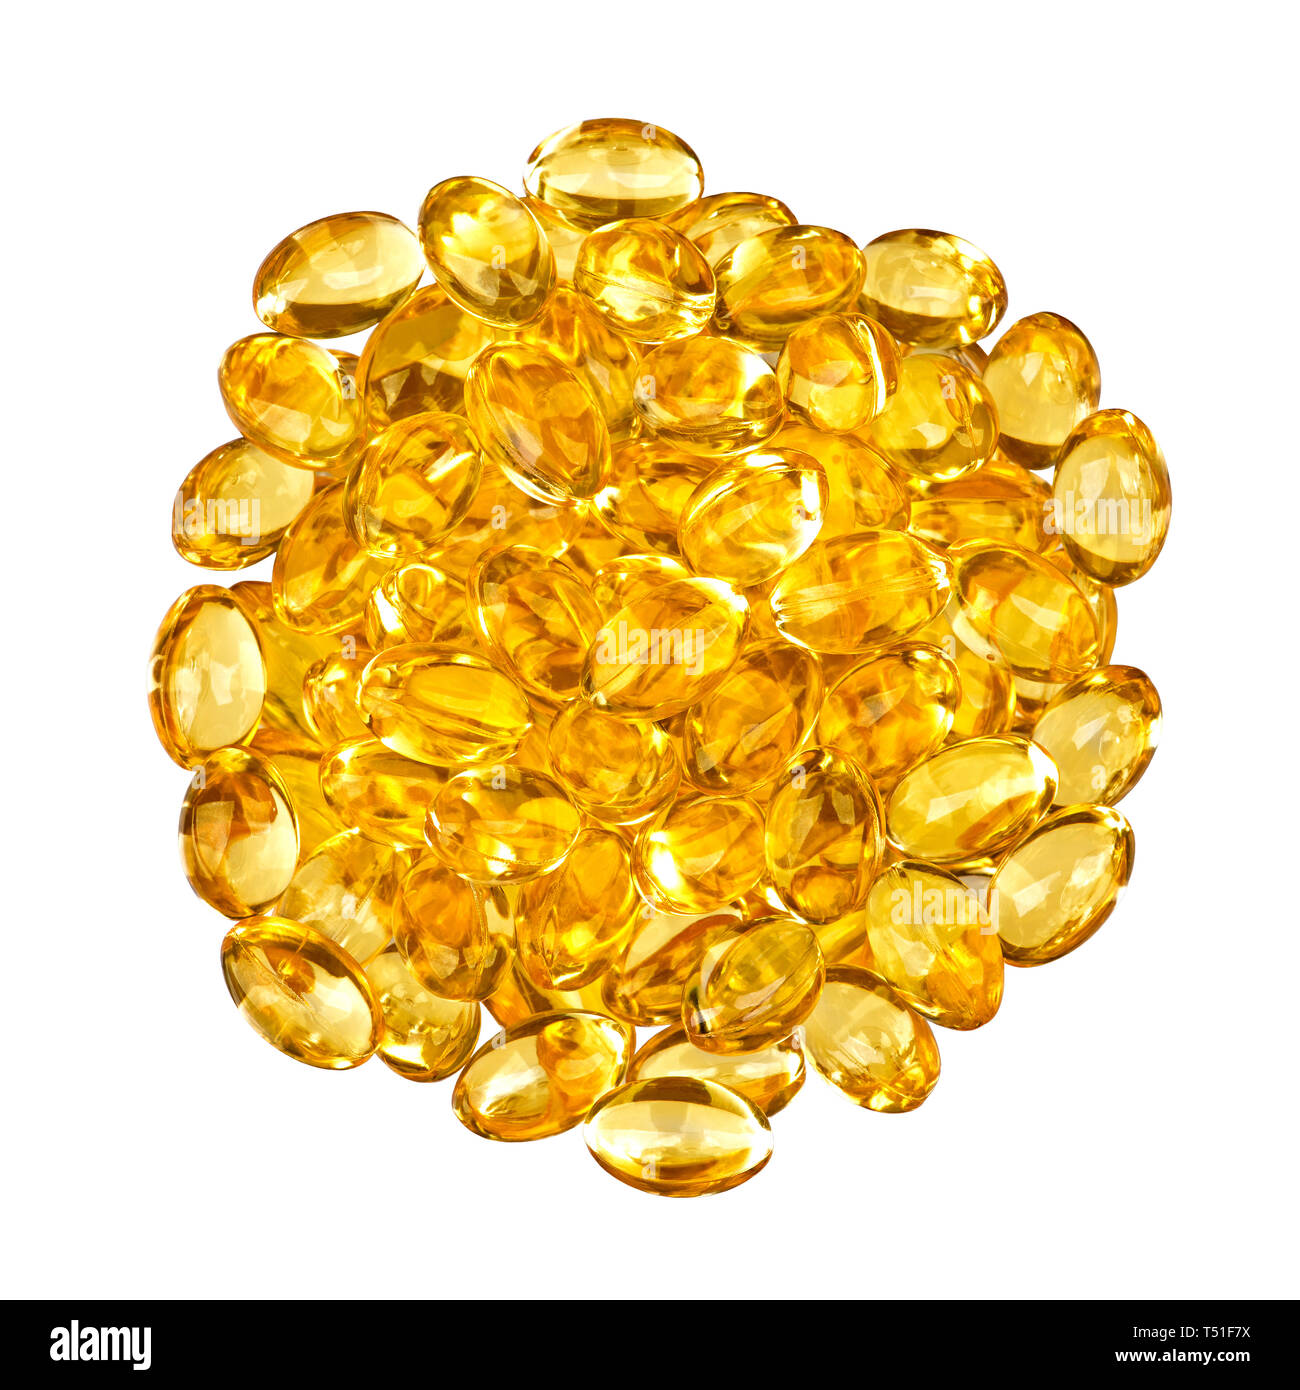 Close-up fish oil nutritional supplement capsules Stock Photo